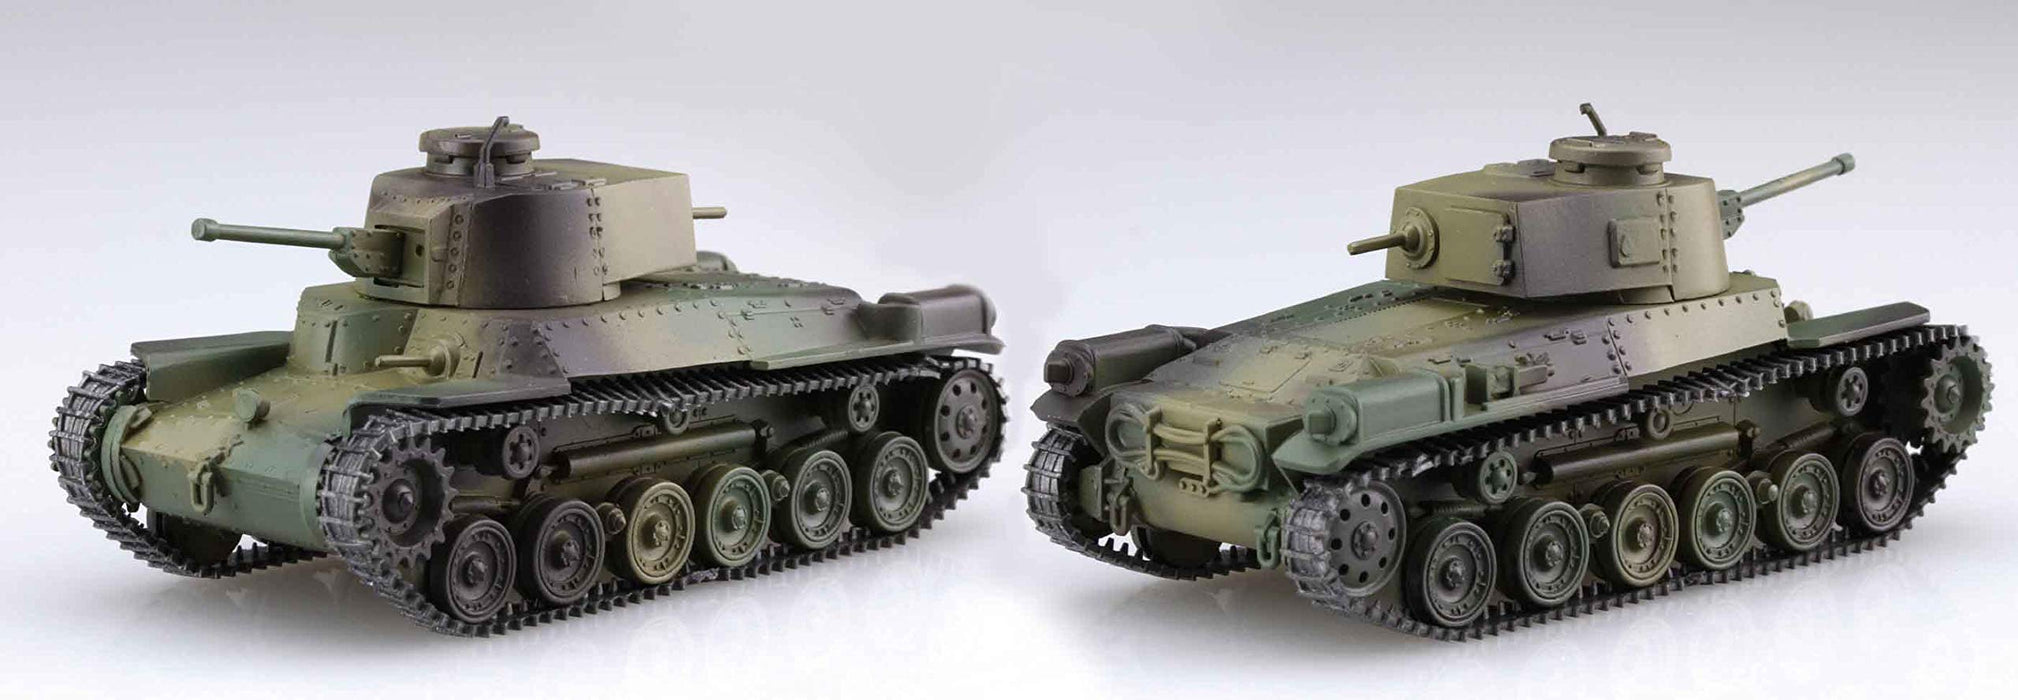 FUJIMI Special World Armour 1/76 Middle Tank Type 97 Chi-Ha Kai 2Pc Special Version W/ Infantry Plastic Model